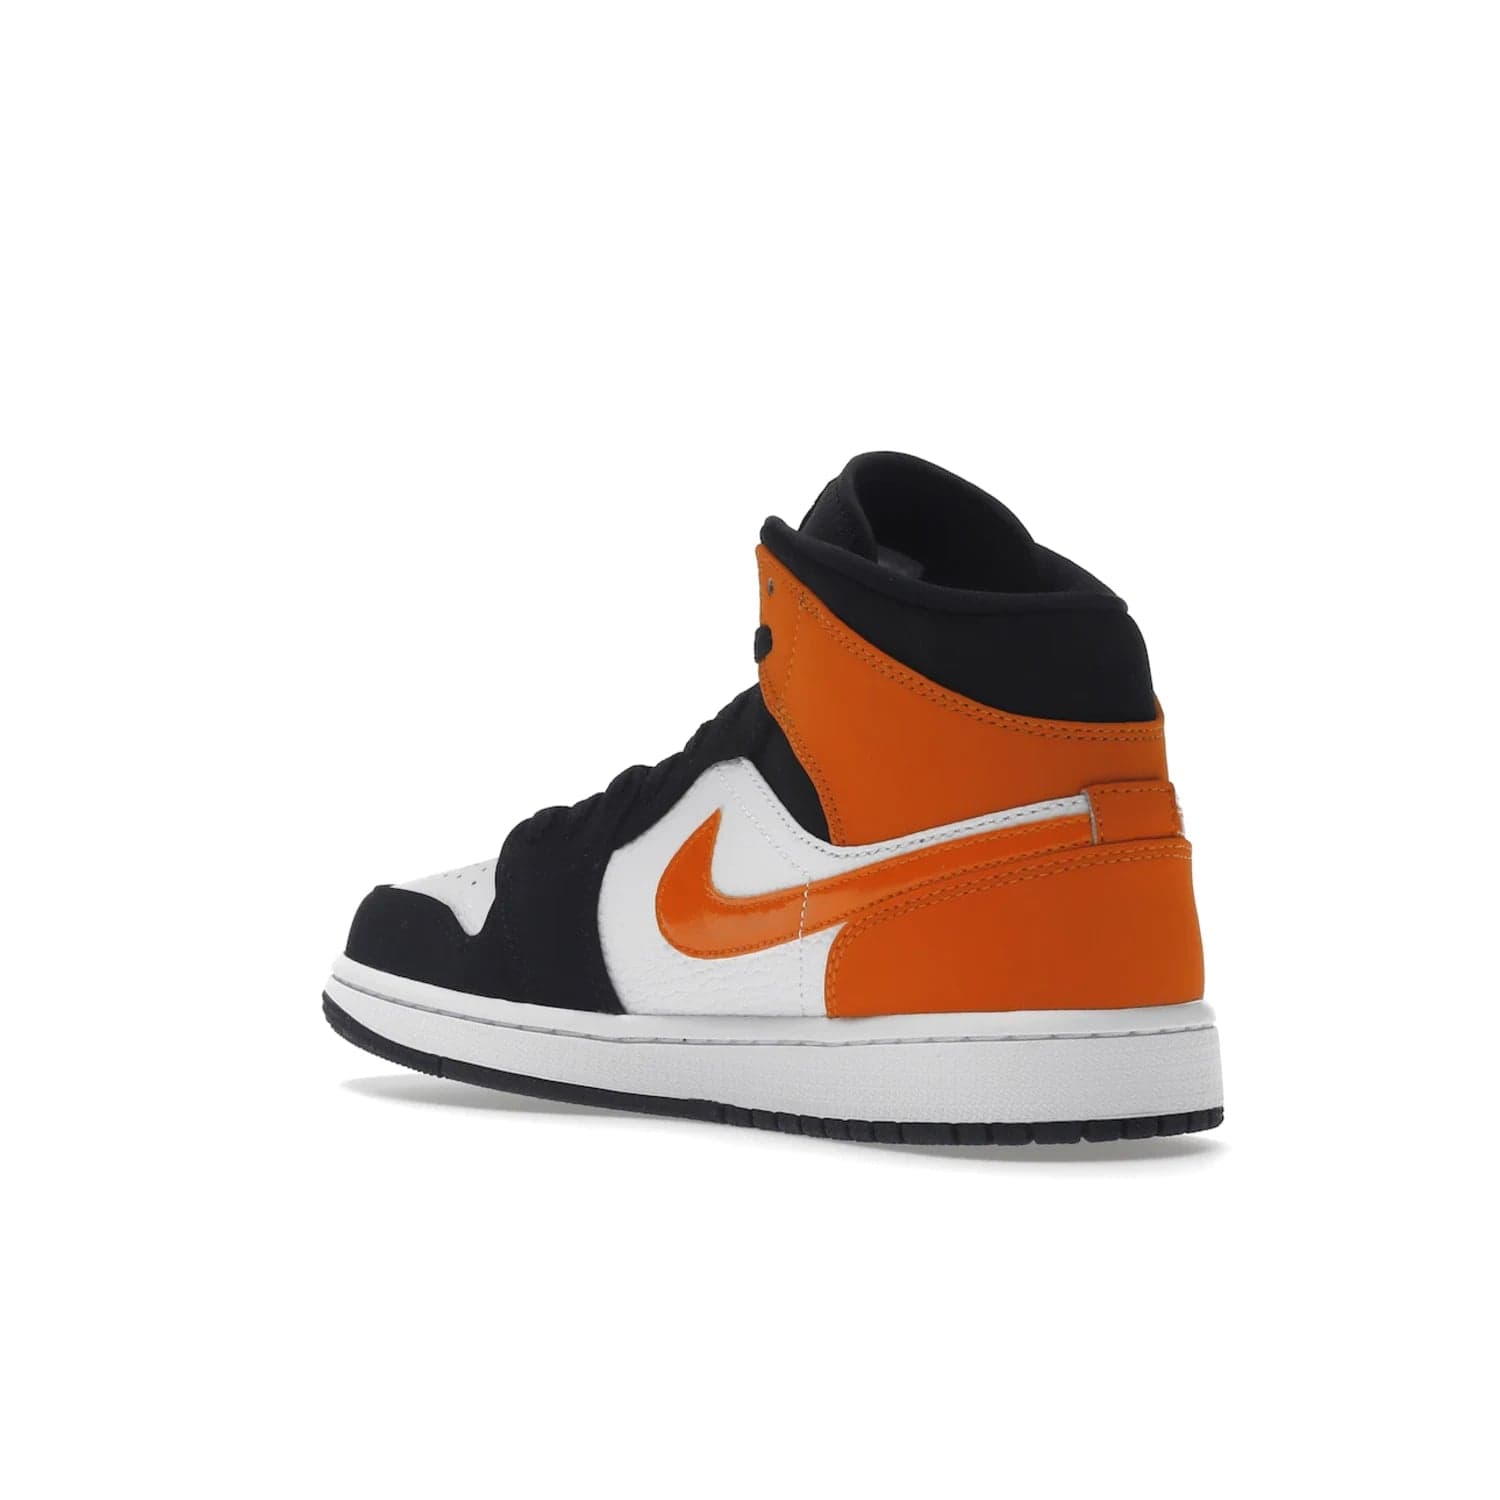 Jordan 1 Mid Shattered Backboard - Image 24 - Only at www.BallersClubKickz.com - The Air Jordan 1 Mid Shattered Backboard offers a timeless Black/White-Starfish colorway. Classic Swoosh logo and AJ insignia plus a shatterd backboard graphic on the insole. Get your pair today!